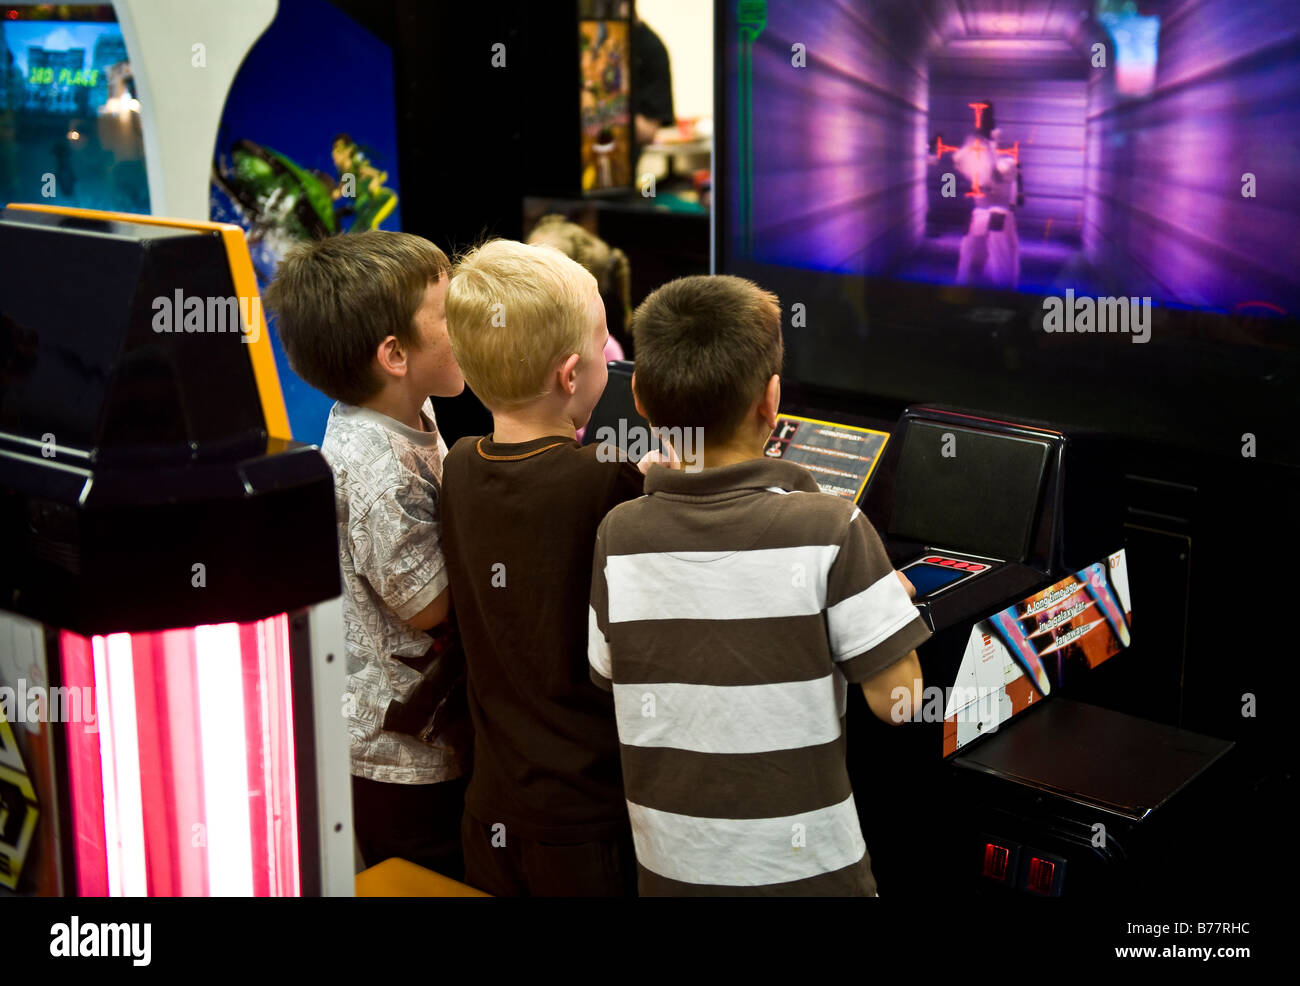 Boys playing a video game in an arcade Stock Photo